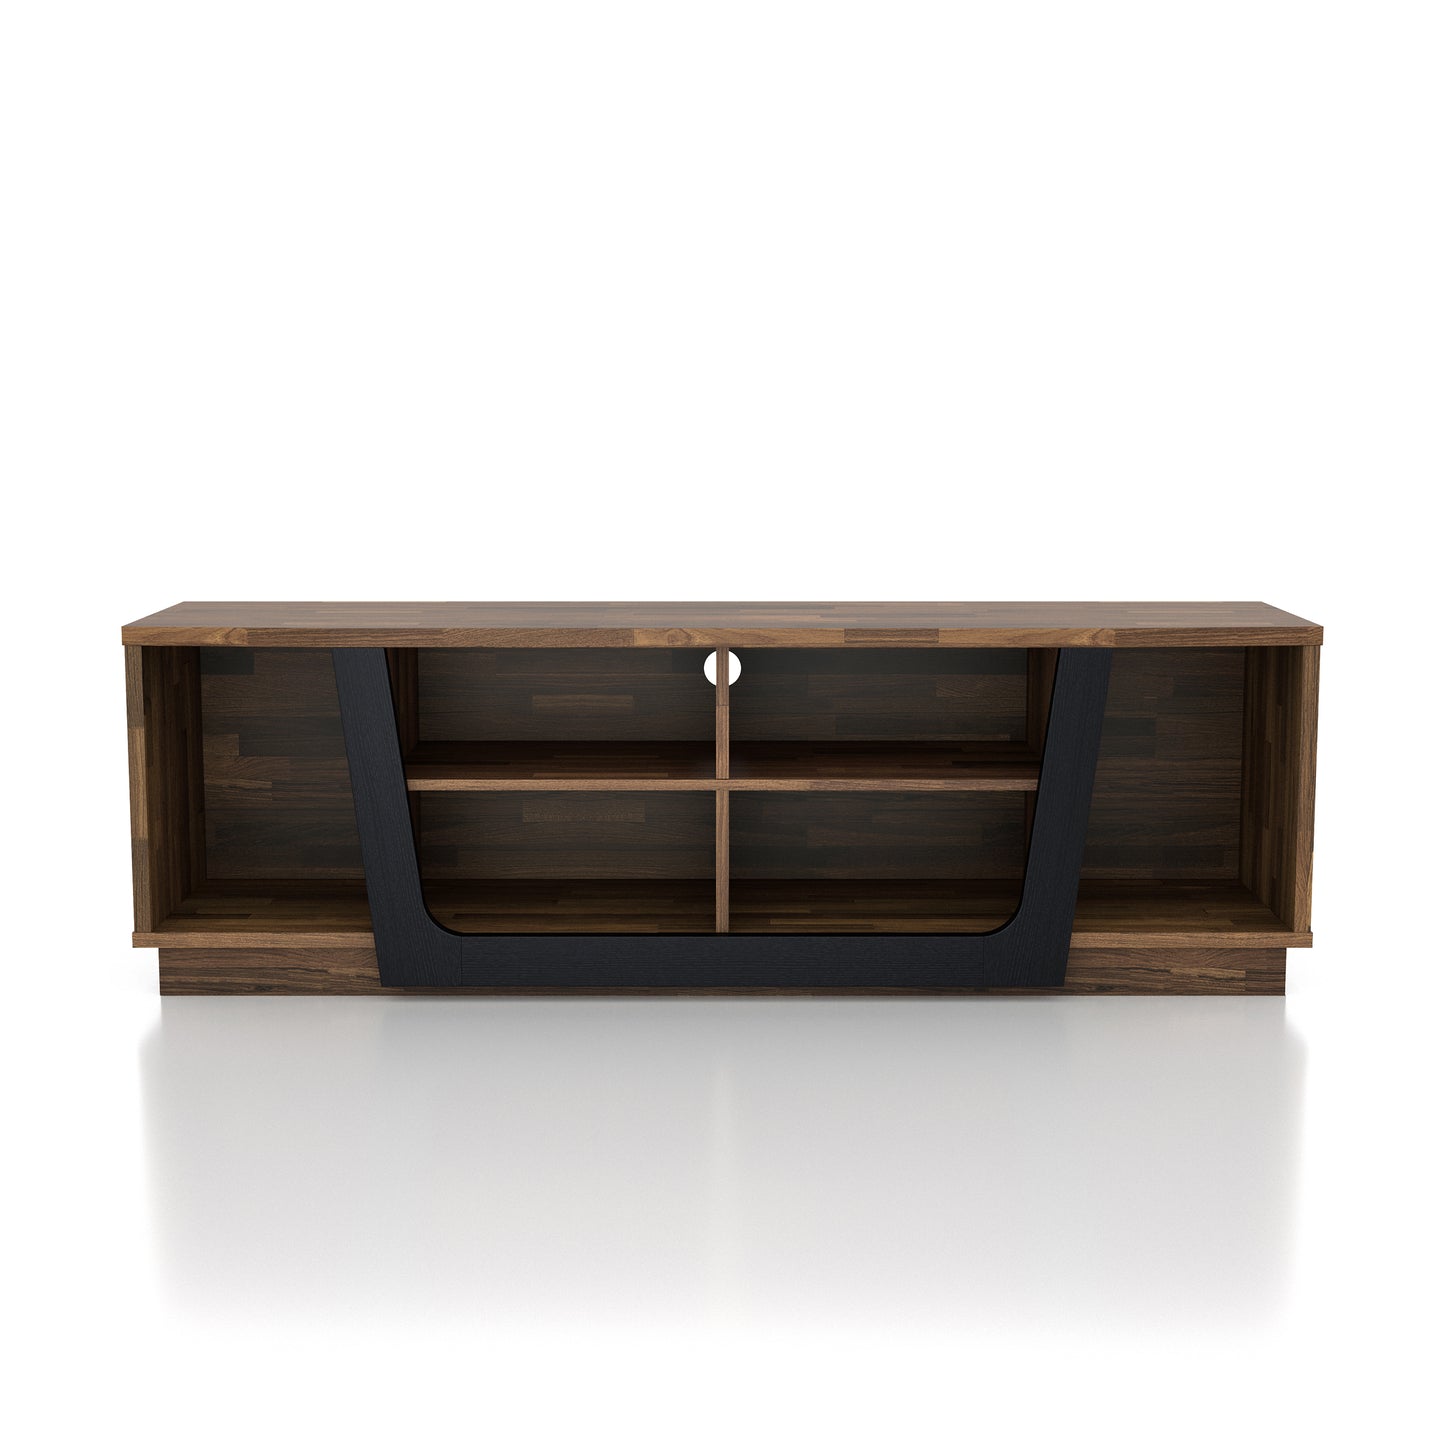 Front-facing contemporary light hickory and black six-shelf TV stand on a white background